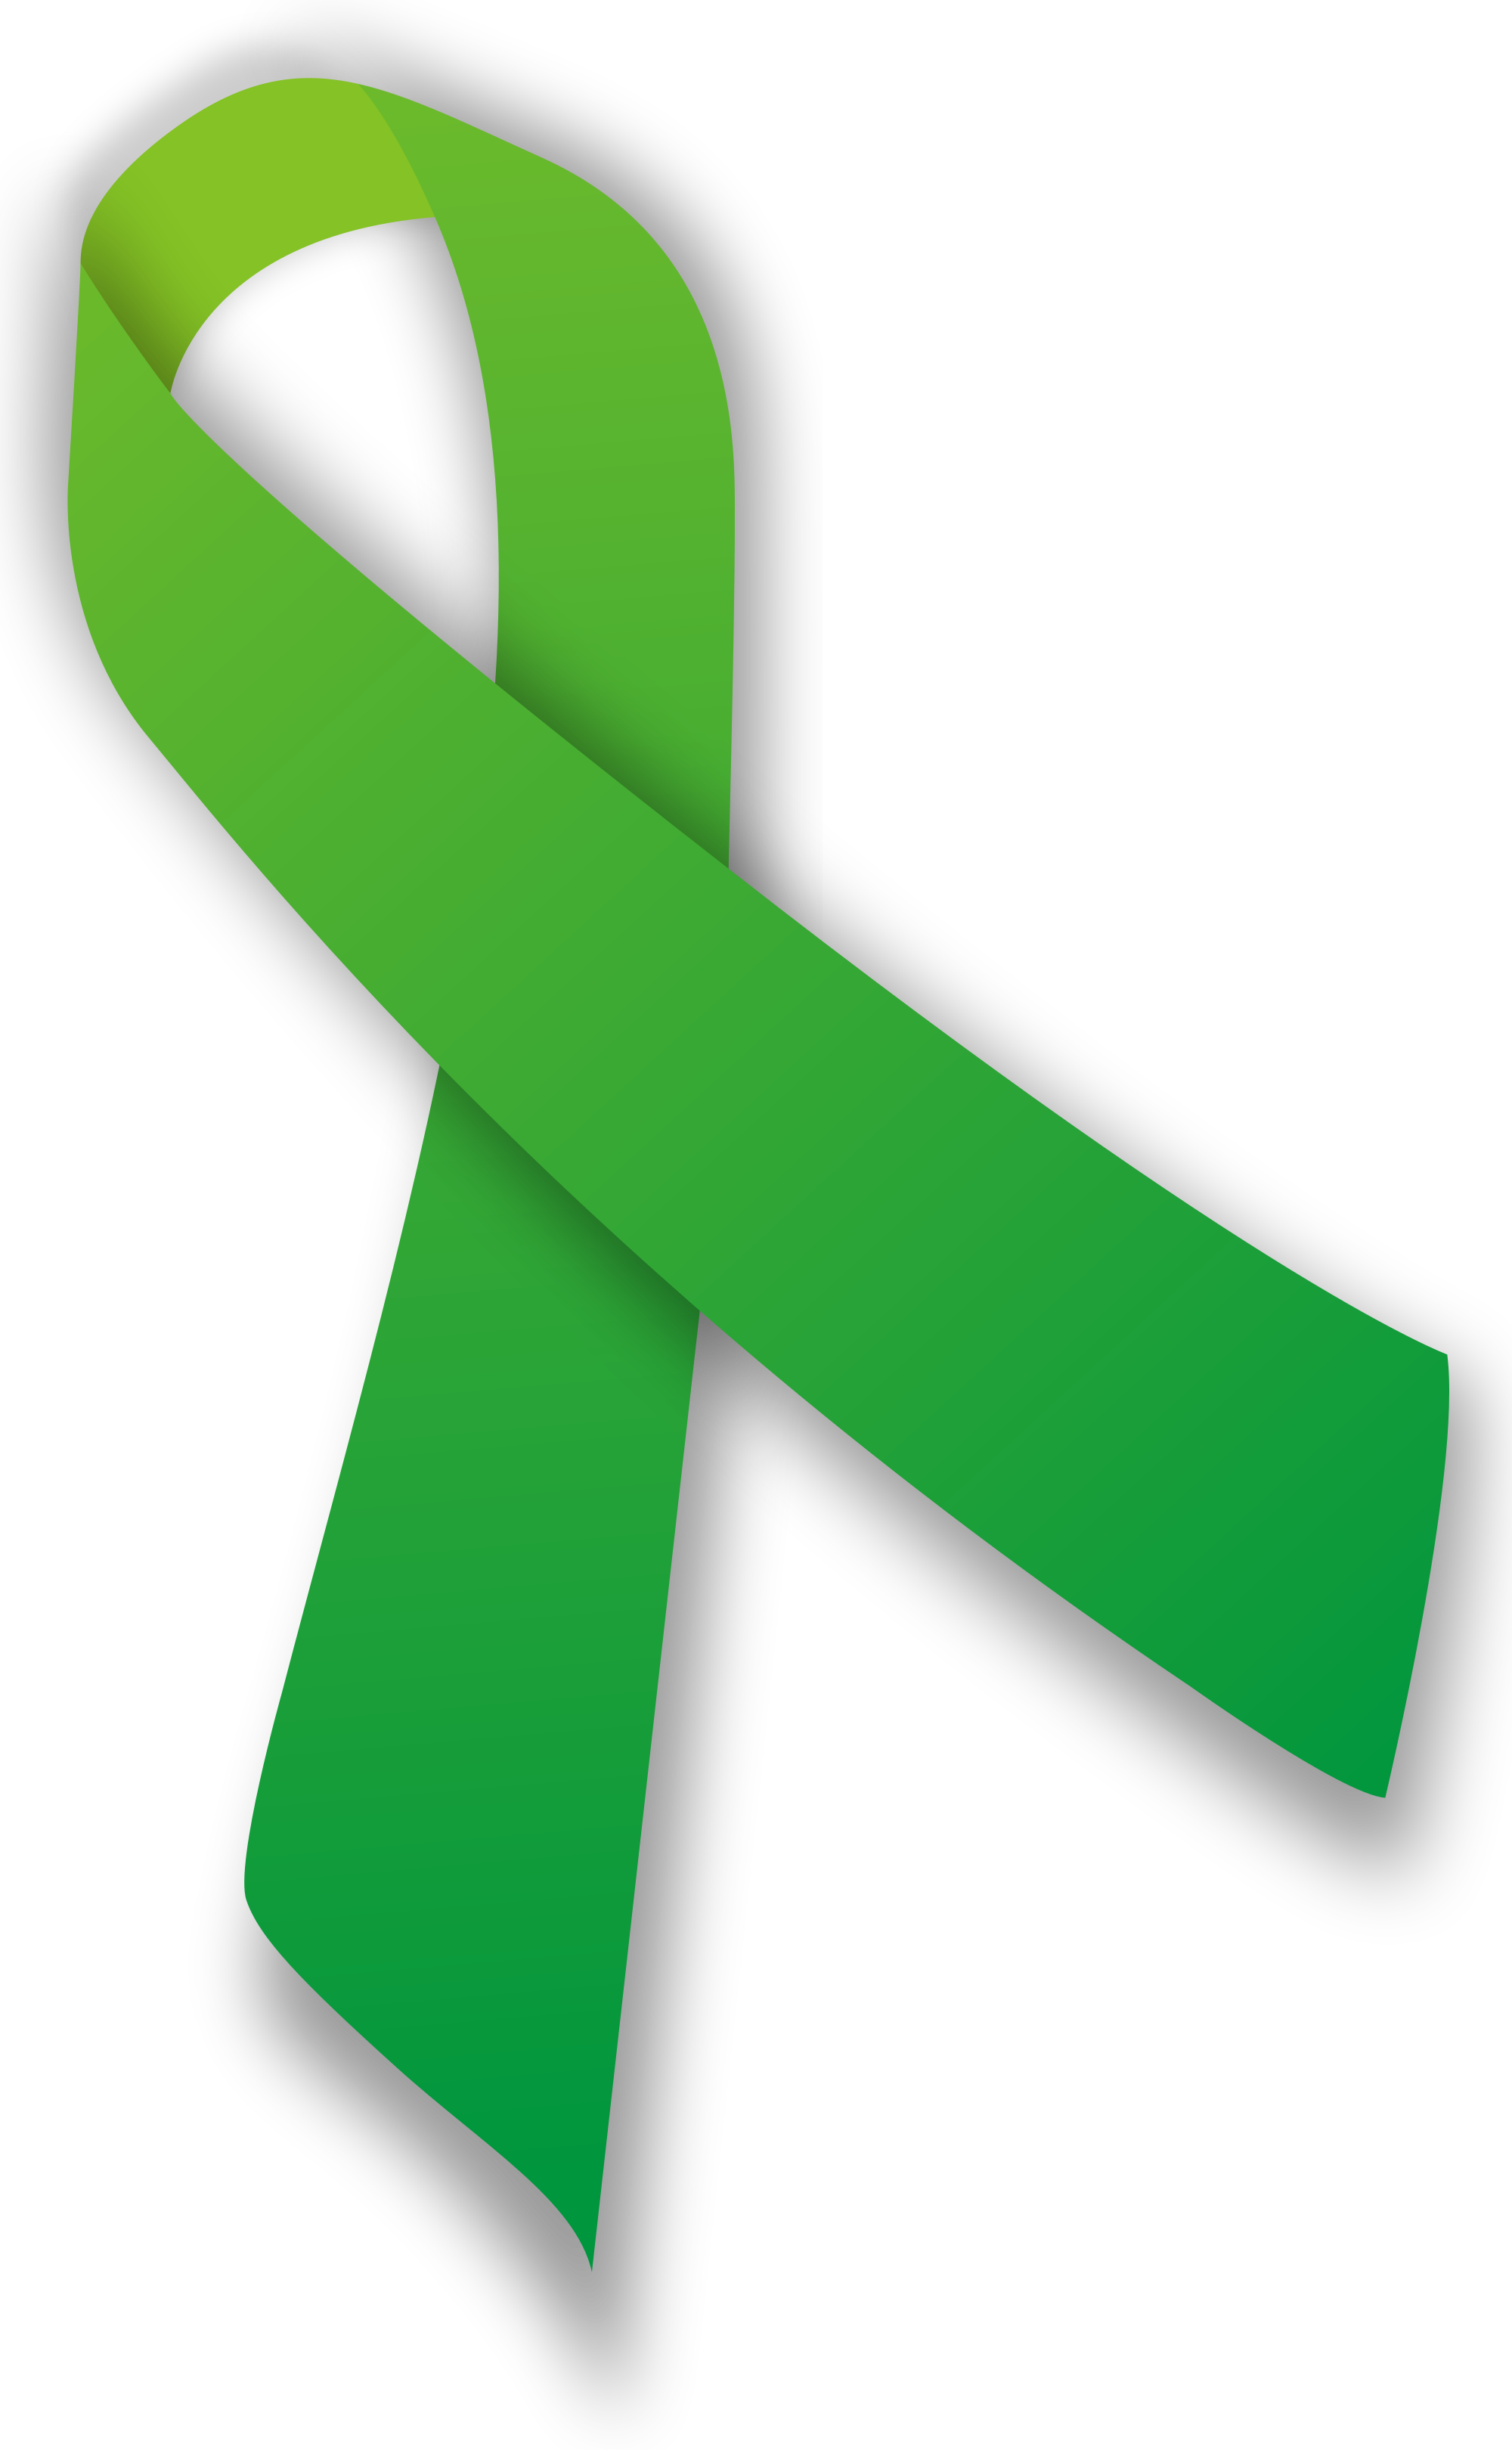 Open - Gallbladder And Bile Duct Cancer Awareness (2000x3240)